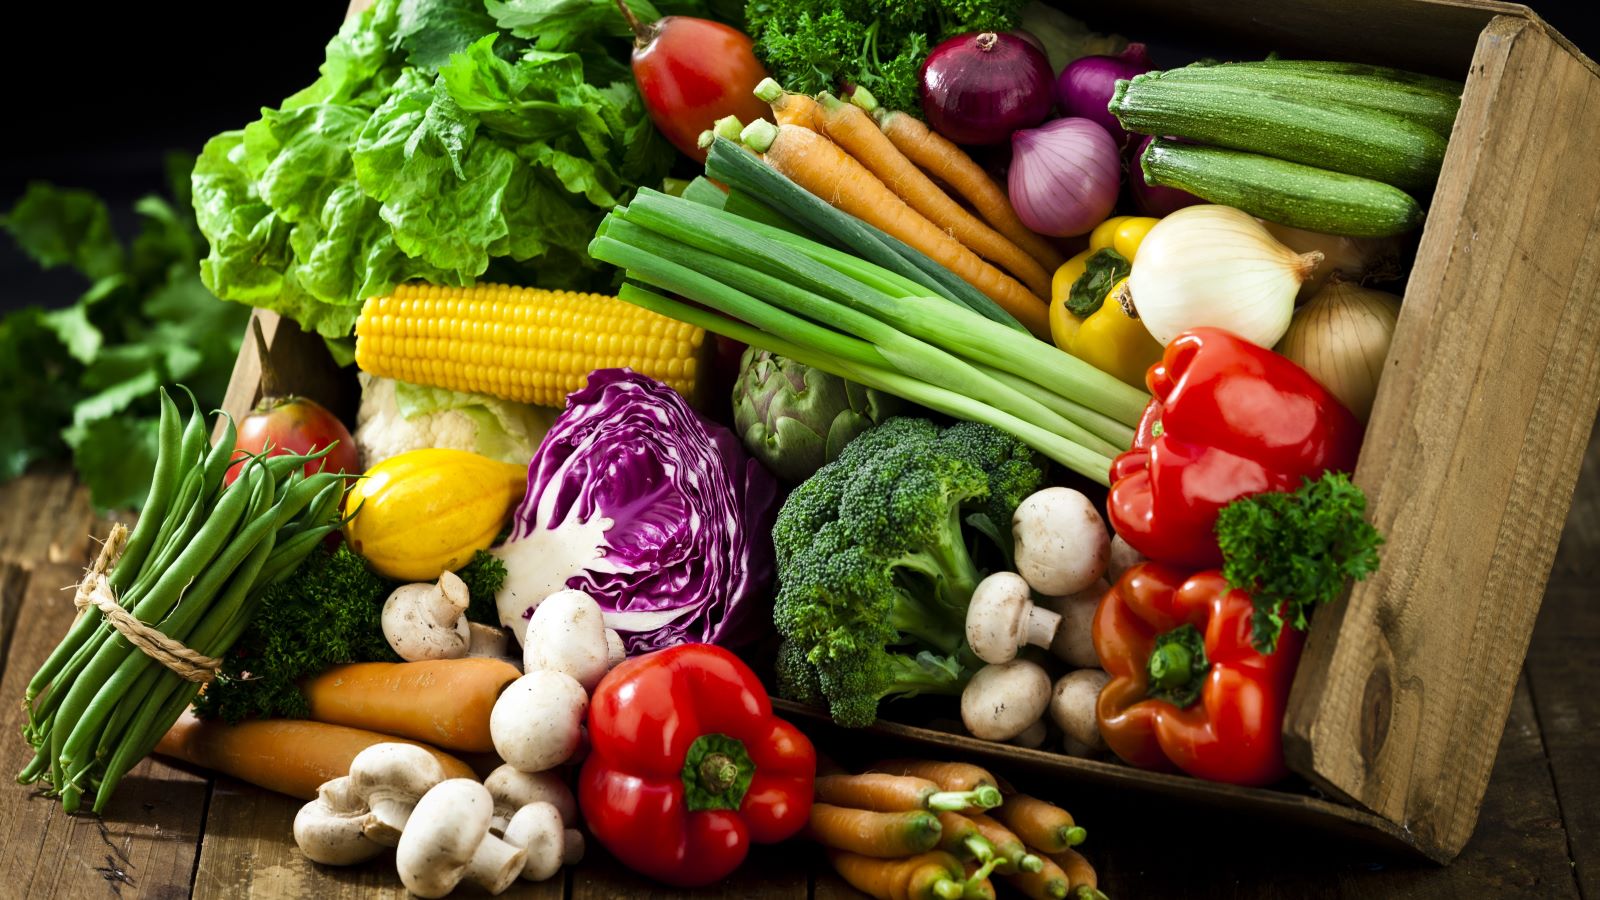 4 Ways to Add Vegetables to Your Diet – Even If You Hate Them